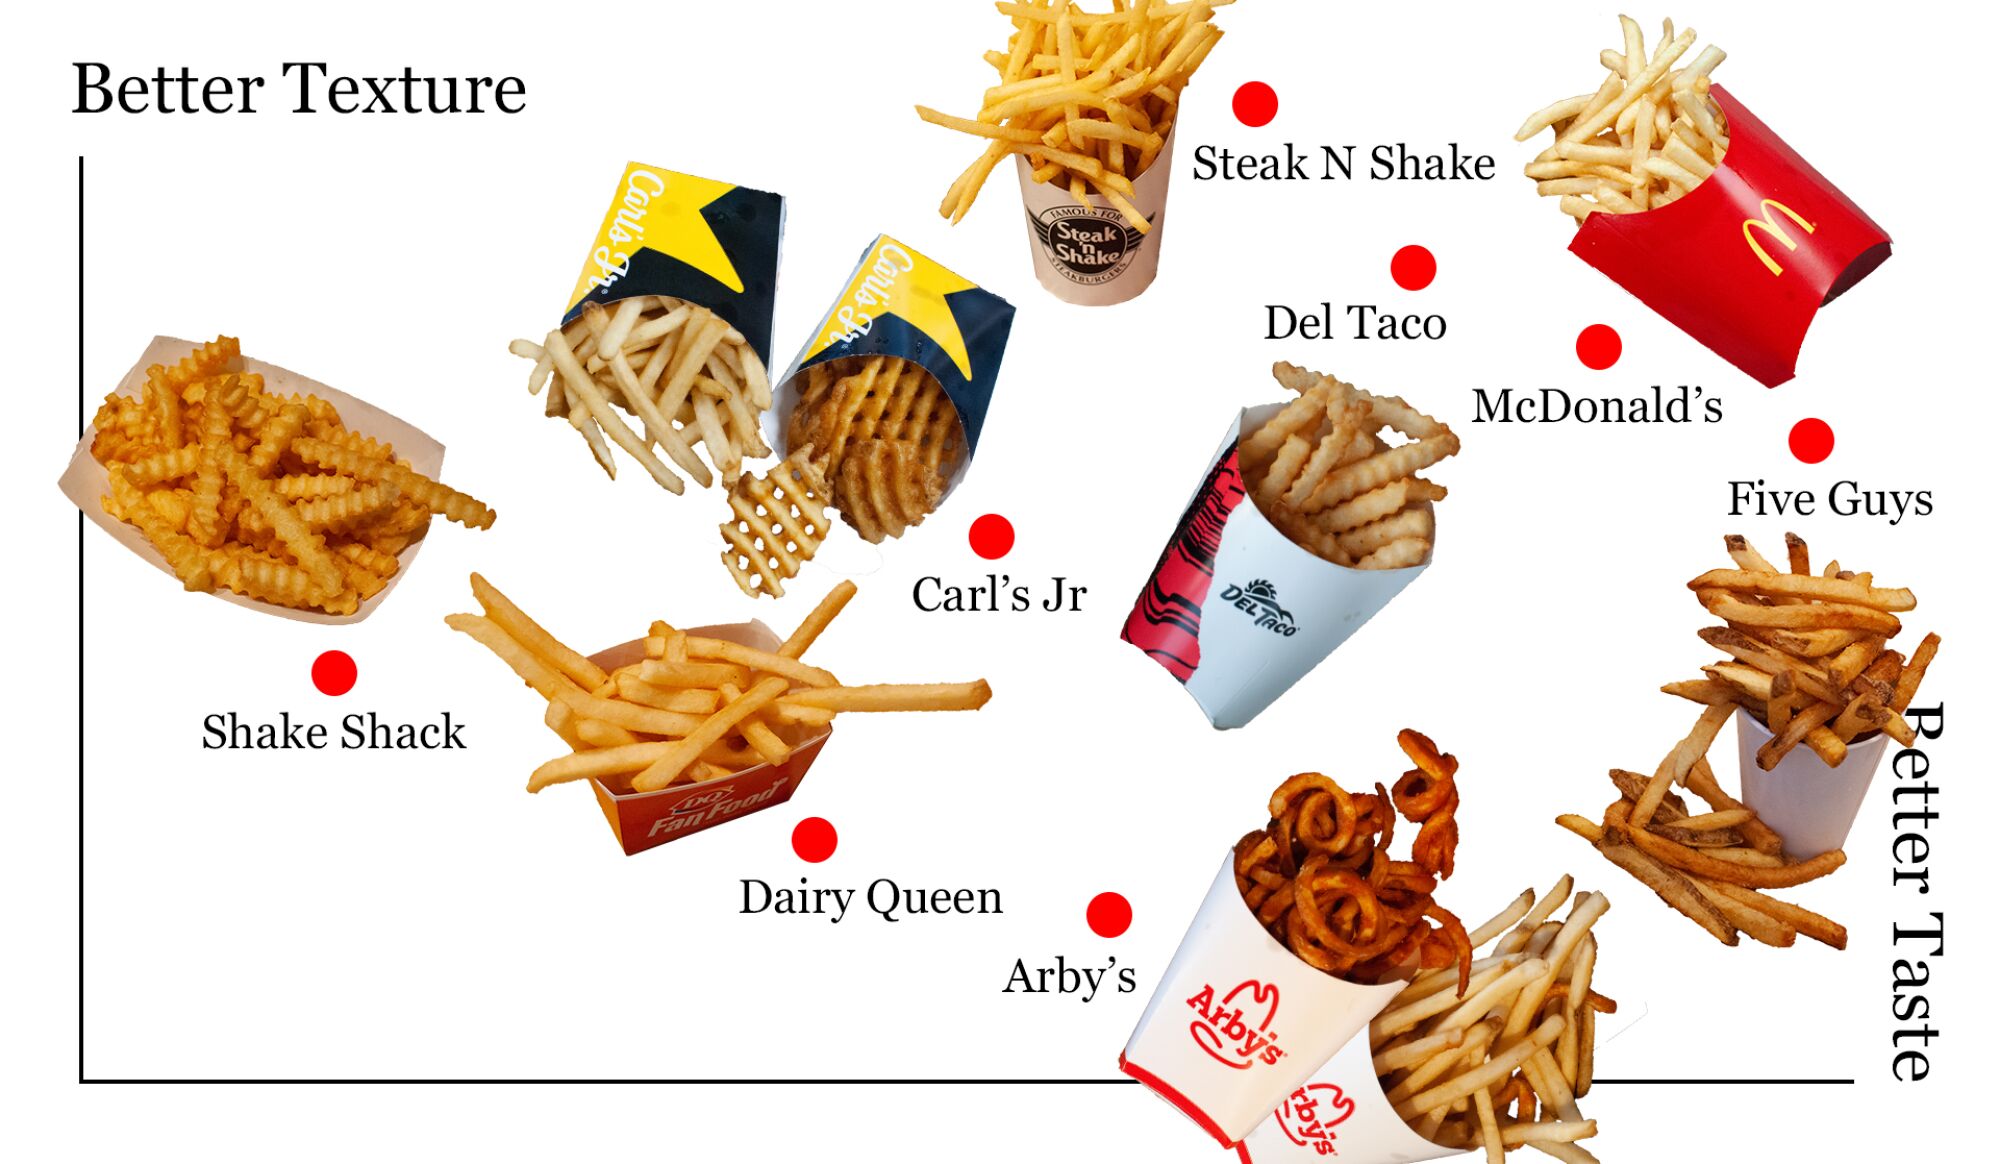 Upper right quadrant of our French fry power rankings.